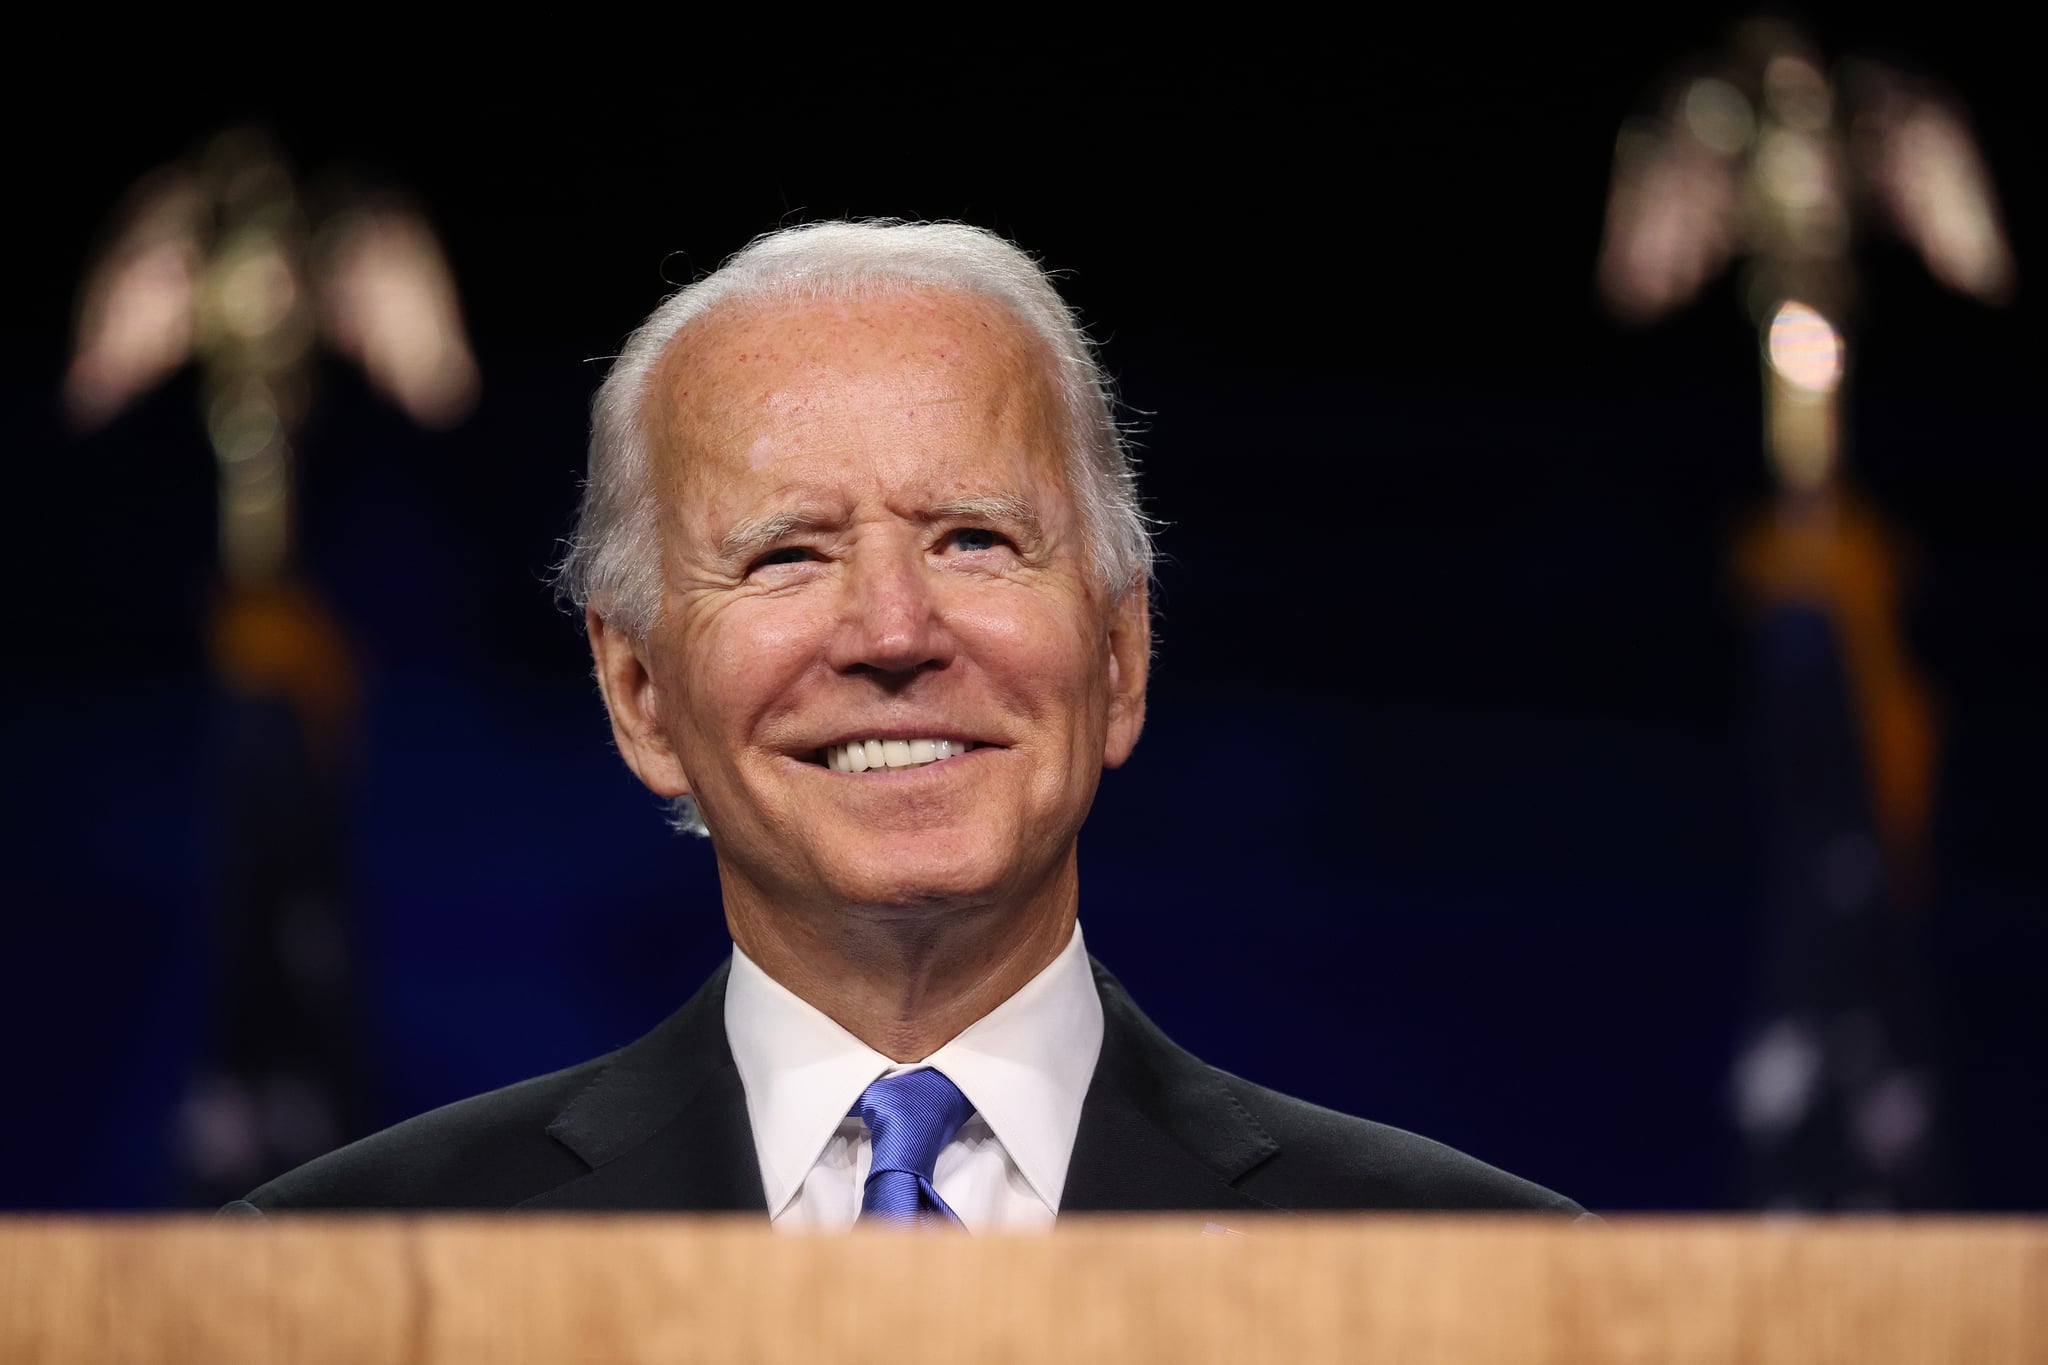 WILMINGTON, DELAWARE - AUGUST 20: Democratic presidential nominee Joe Biden delivers his acceptance speech on the fourth night of the Democratic National Convention from the Chase Centre on August 20, 2020 in Wilmington, Delaware. The convention, which was once expected to draw 50,000 people to Milwaukee, Wisconsin, is now taking place virtually due to the coronavirus pandemic. (Photo by Win McNamee/Getty Images)